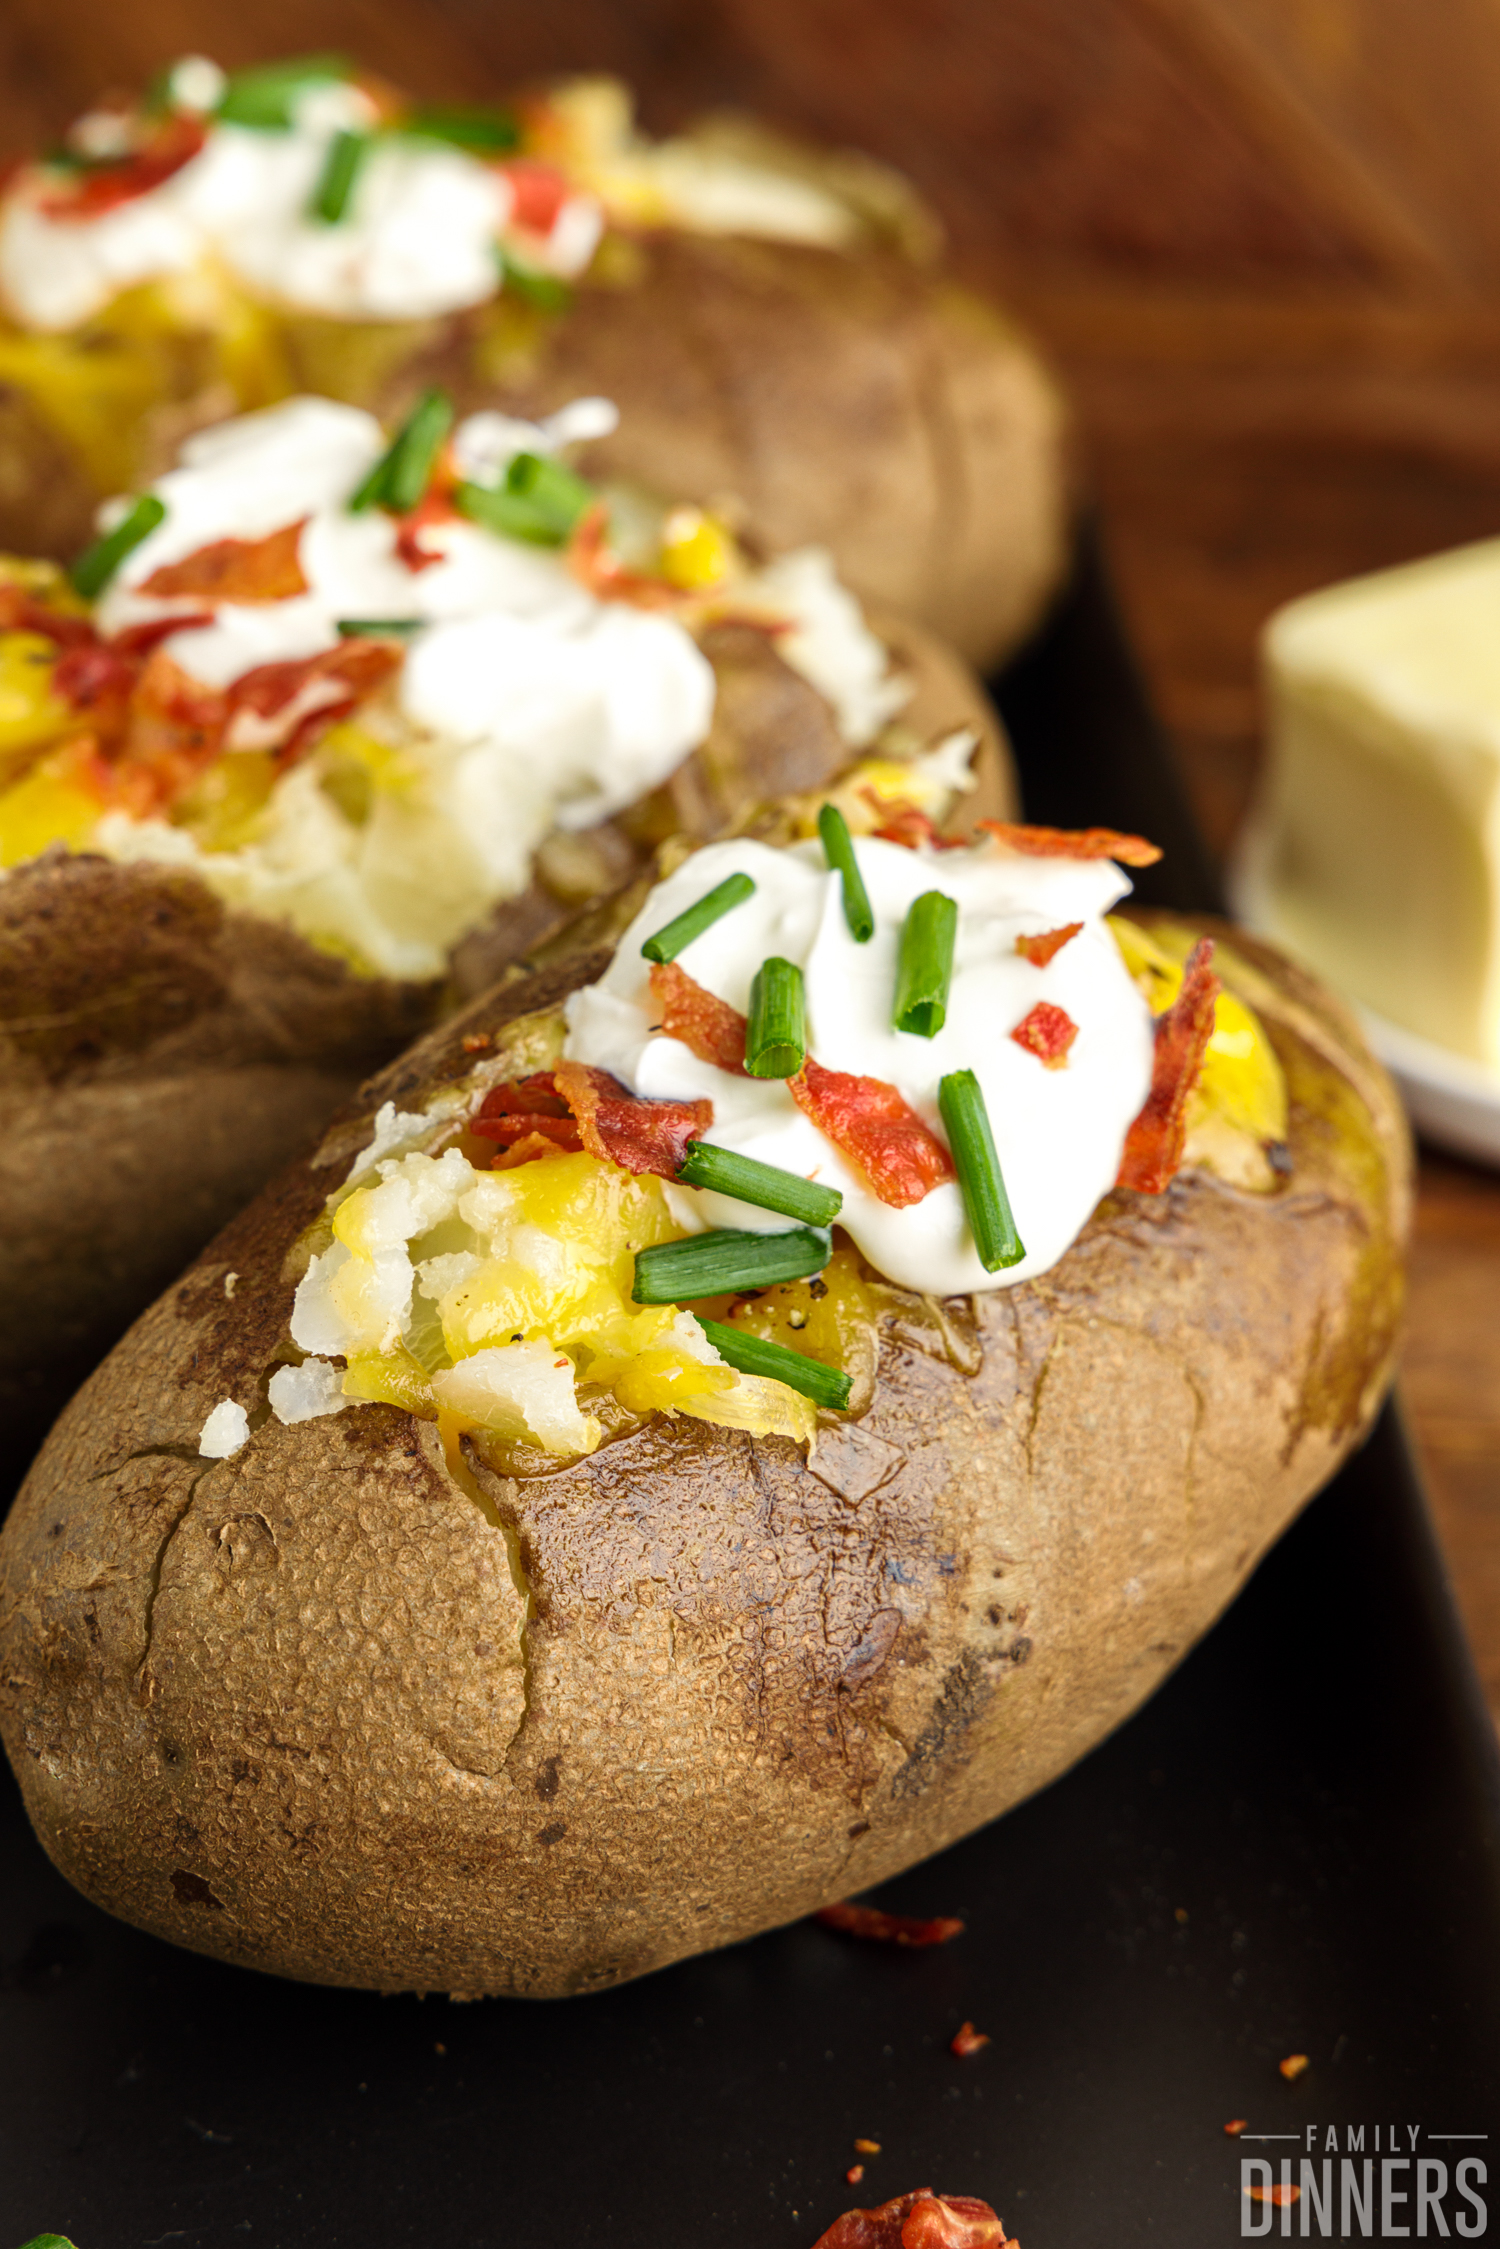 Close up of baked potatoes cut open and loaded with cheese, sour cream, chives and bacon bits.